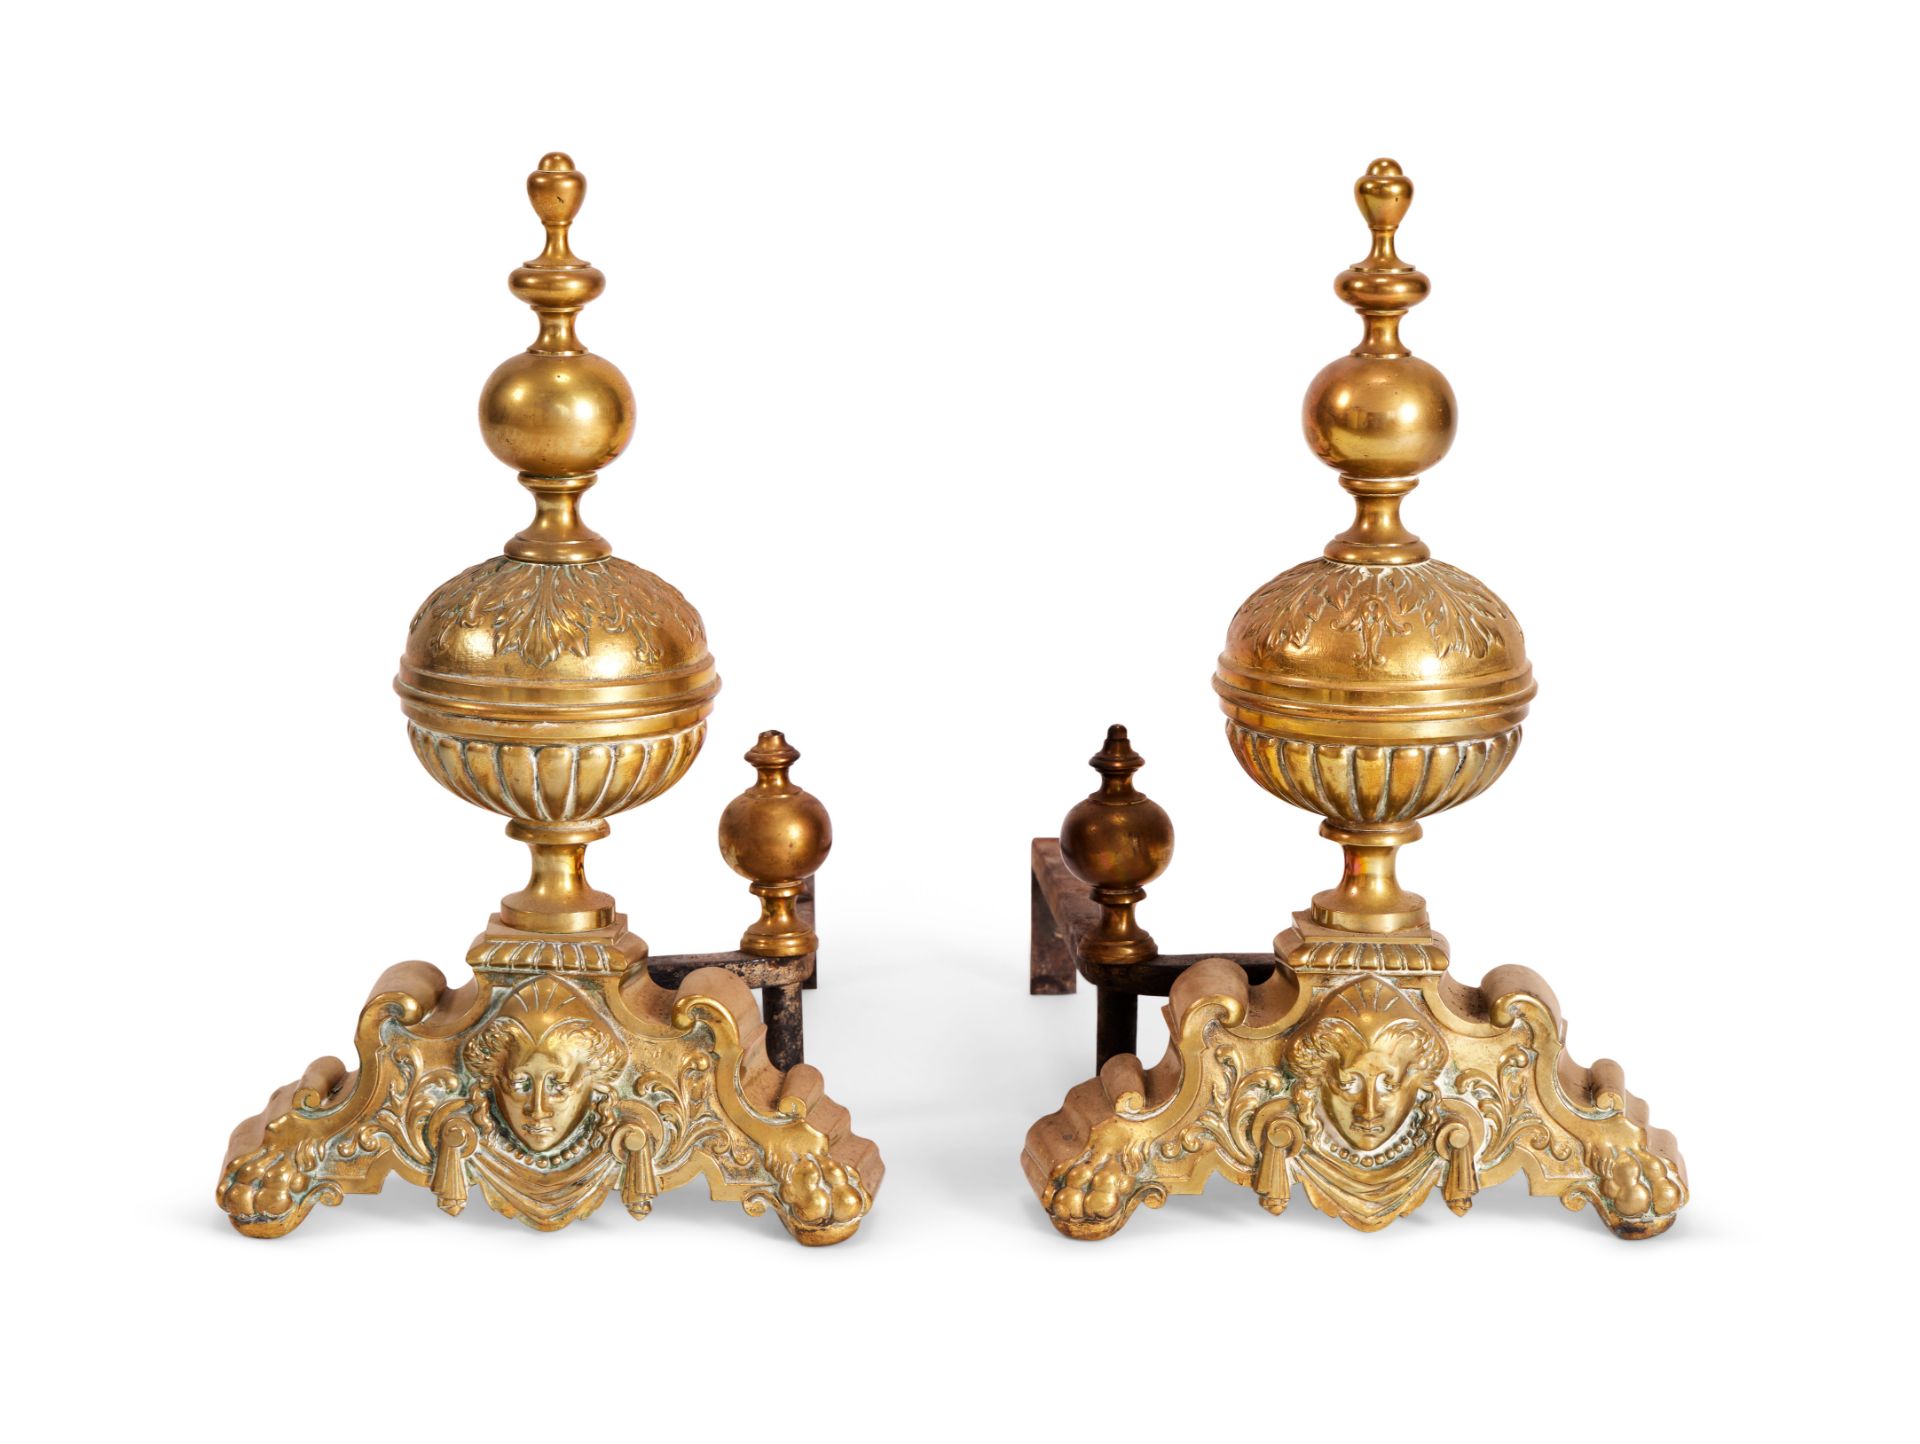 A pair of 19th century brass andirons